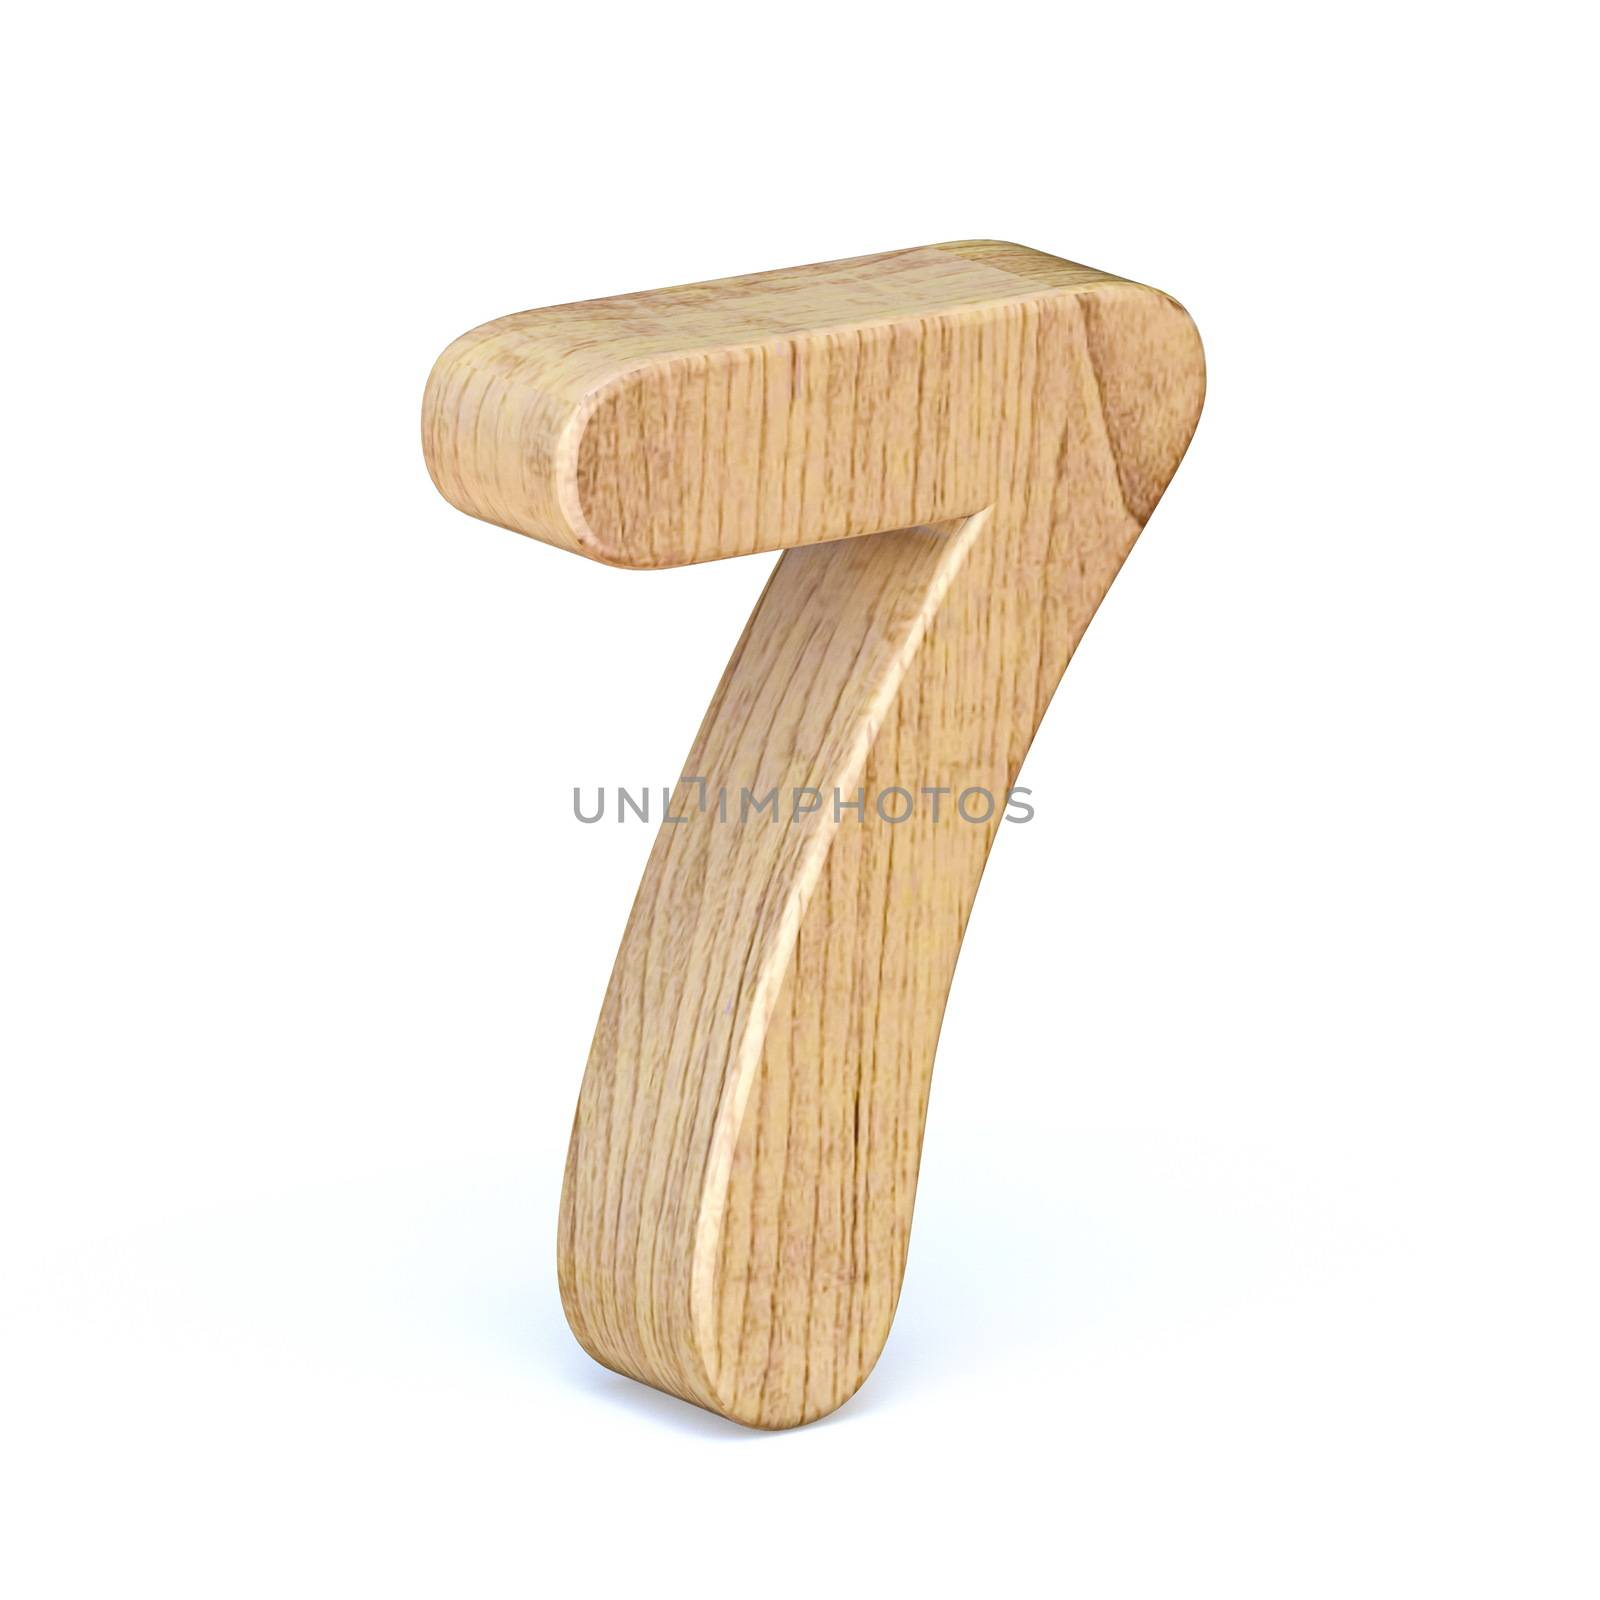 Rounded wooden font Number 7 SEVEN 3D render illustration isolated on white background